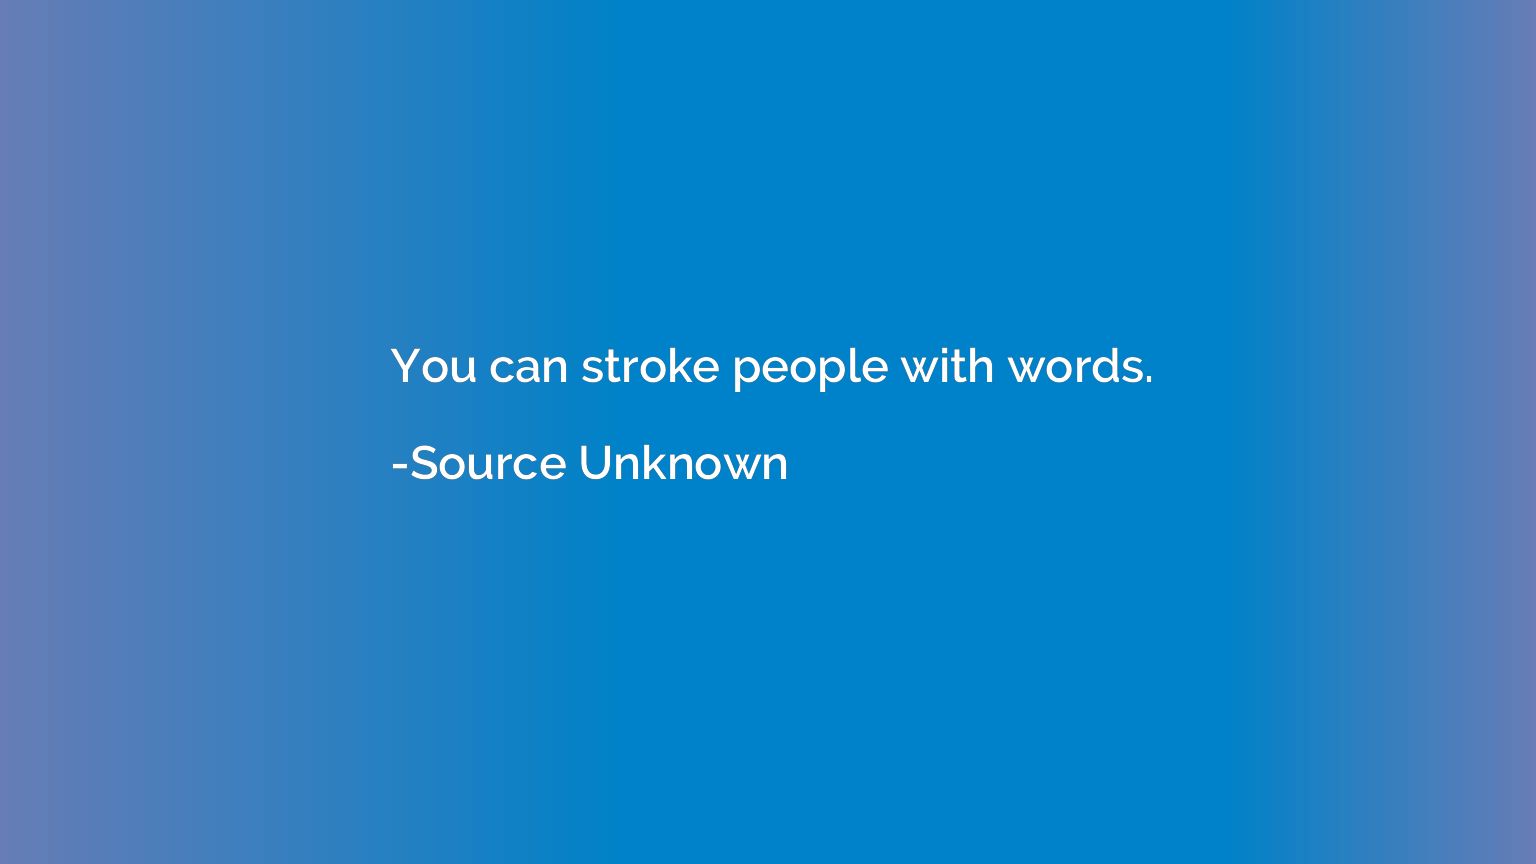 You can stroke people with words.